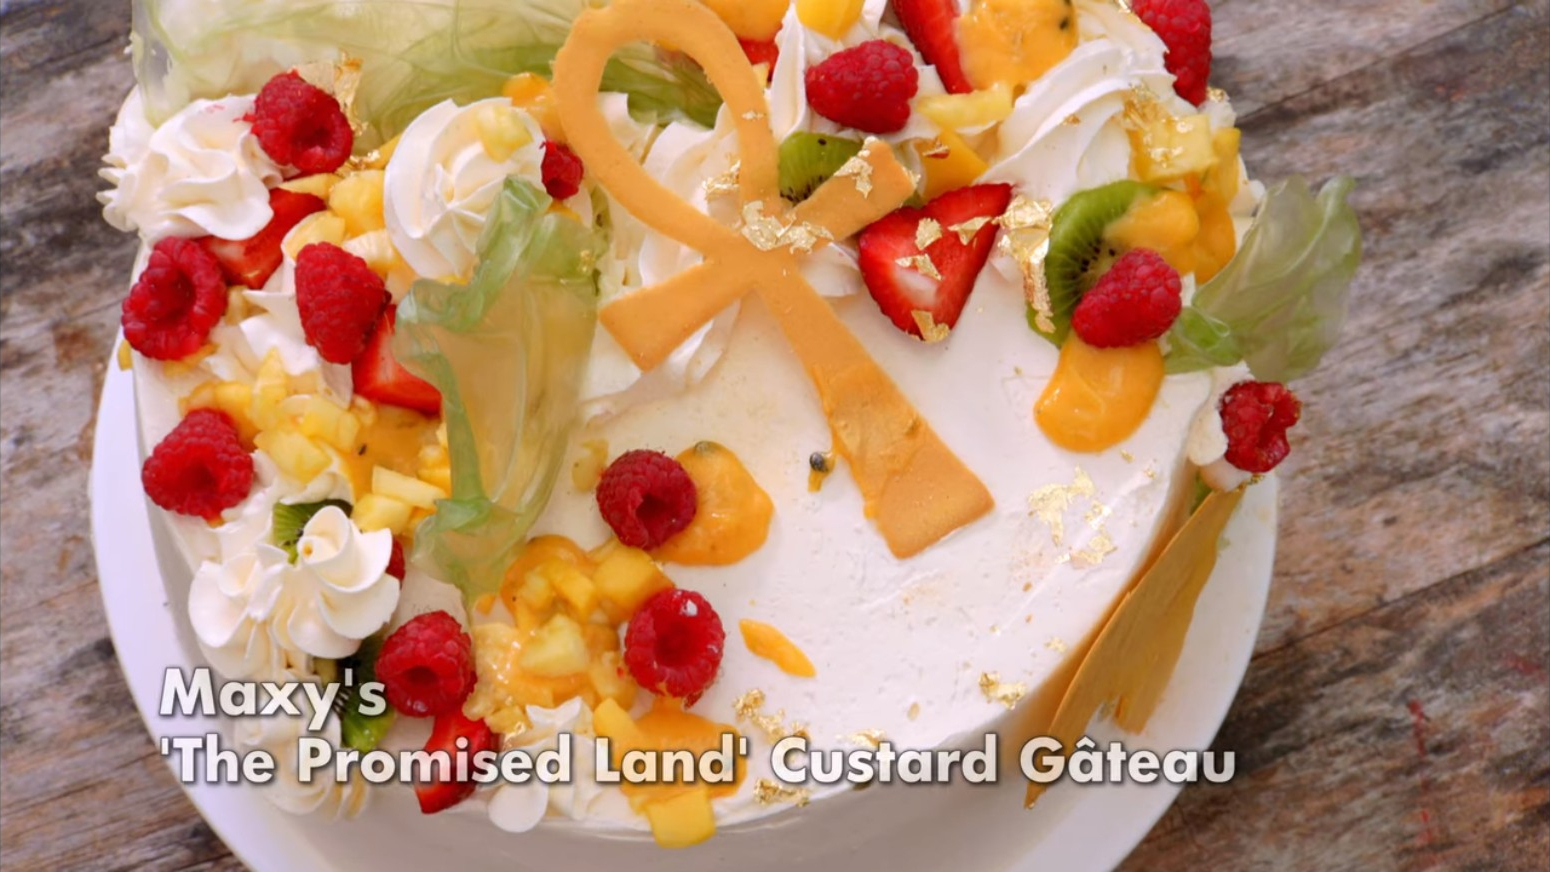 Picture shows: Maxy's The Promised Land Showstopper from The Great British Baking Show's Custard Week